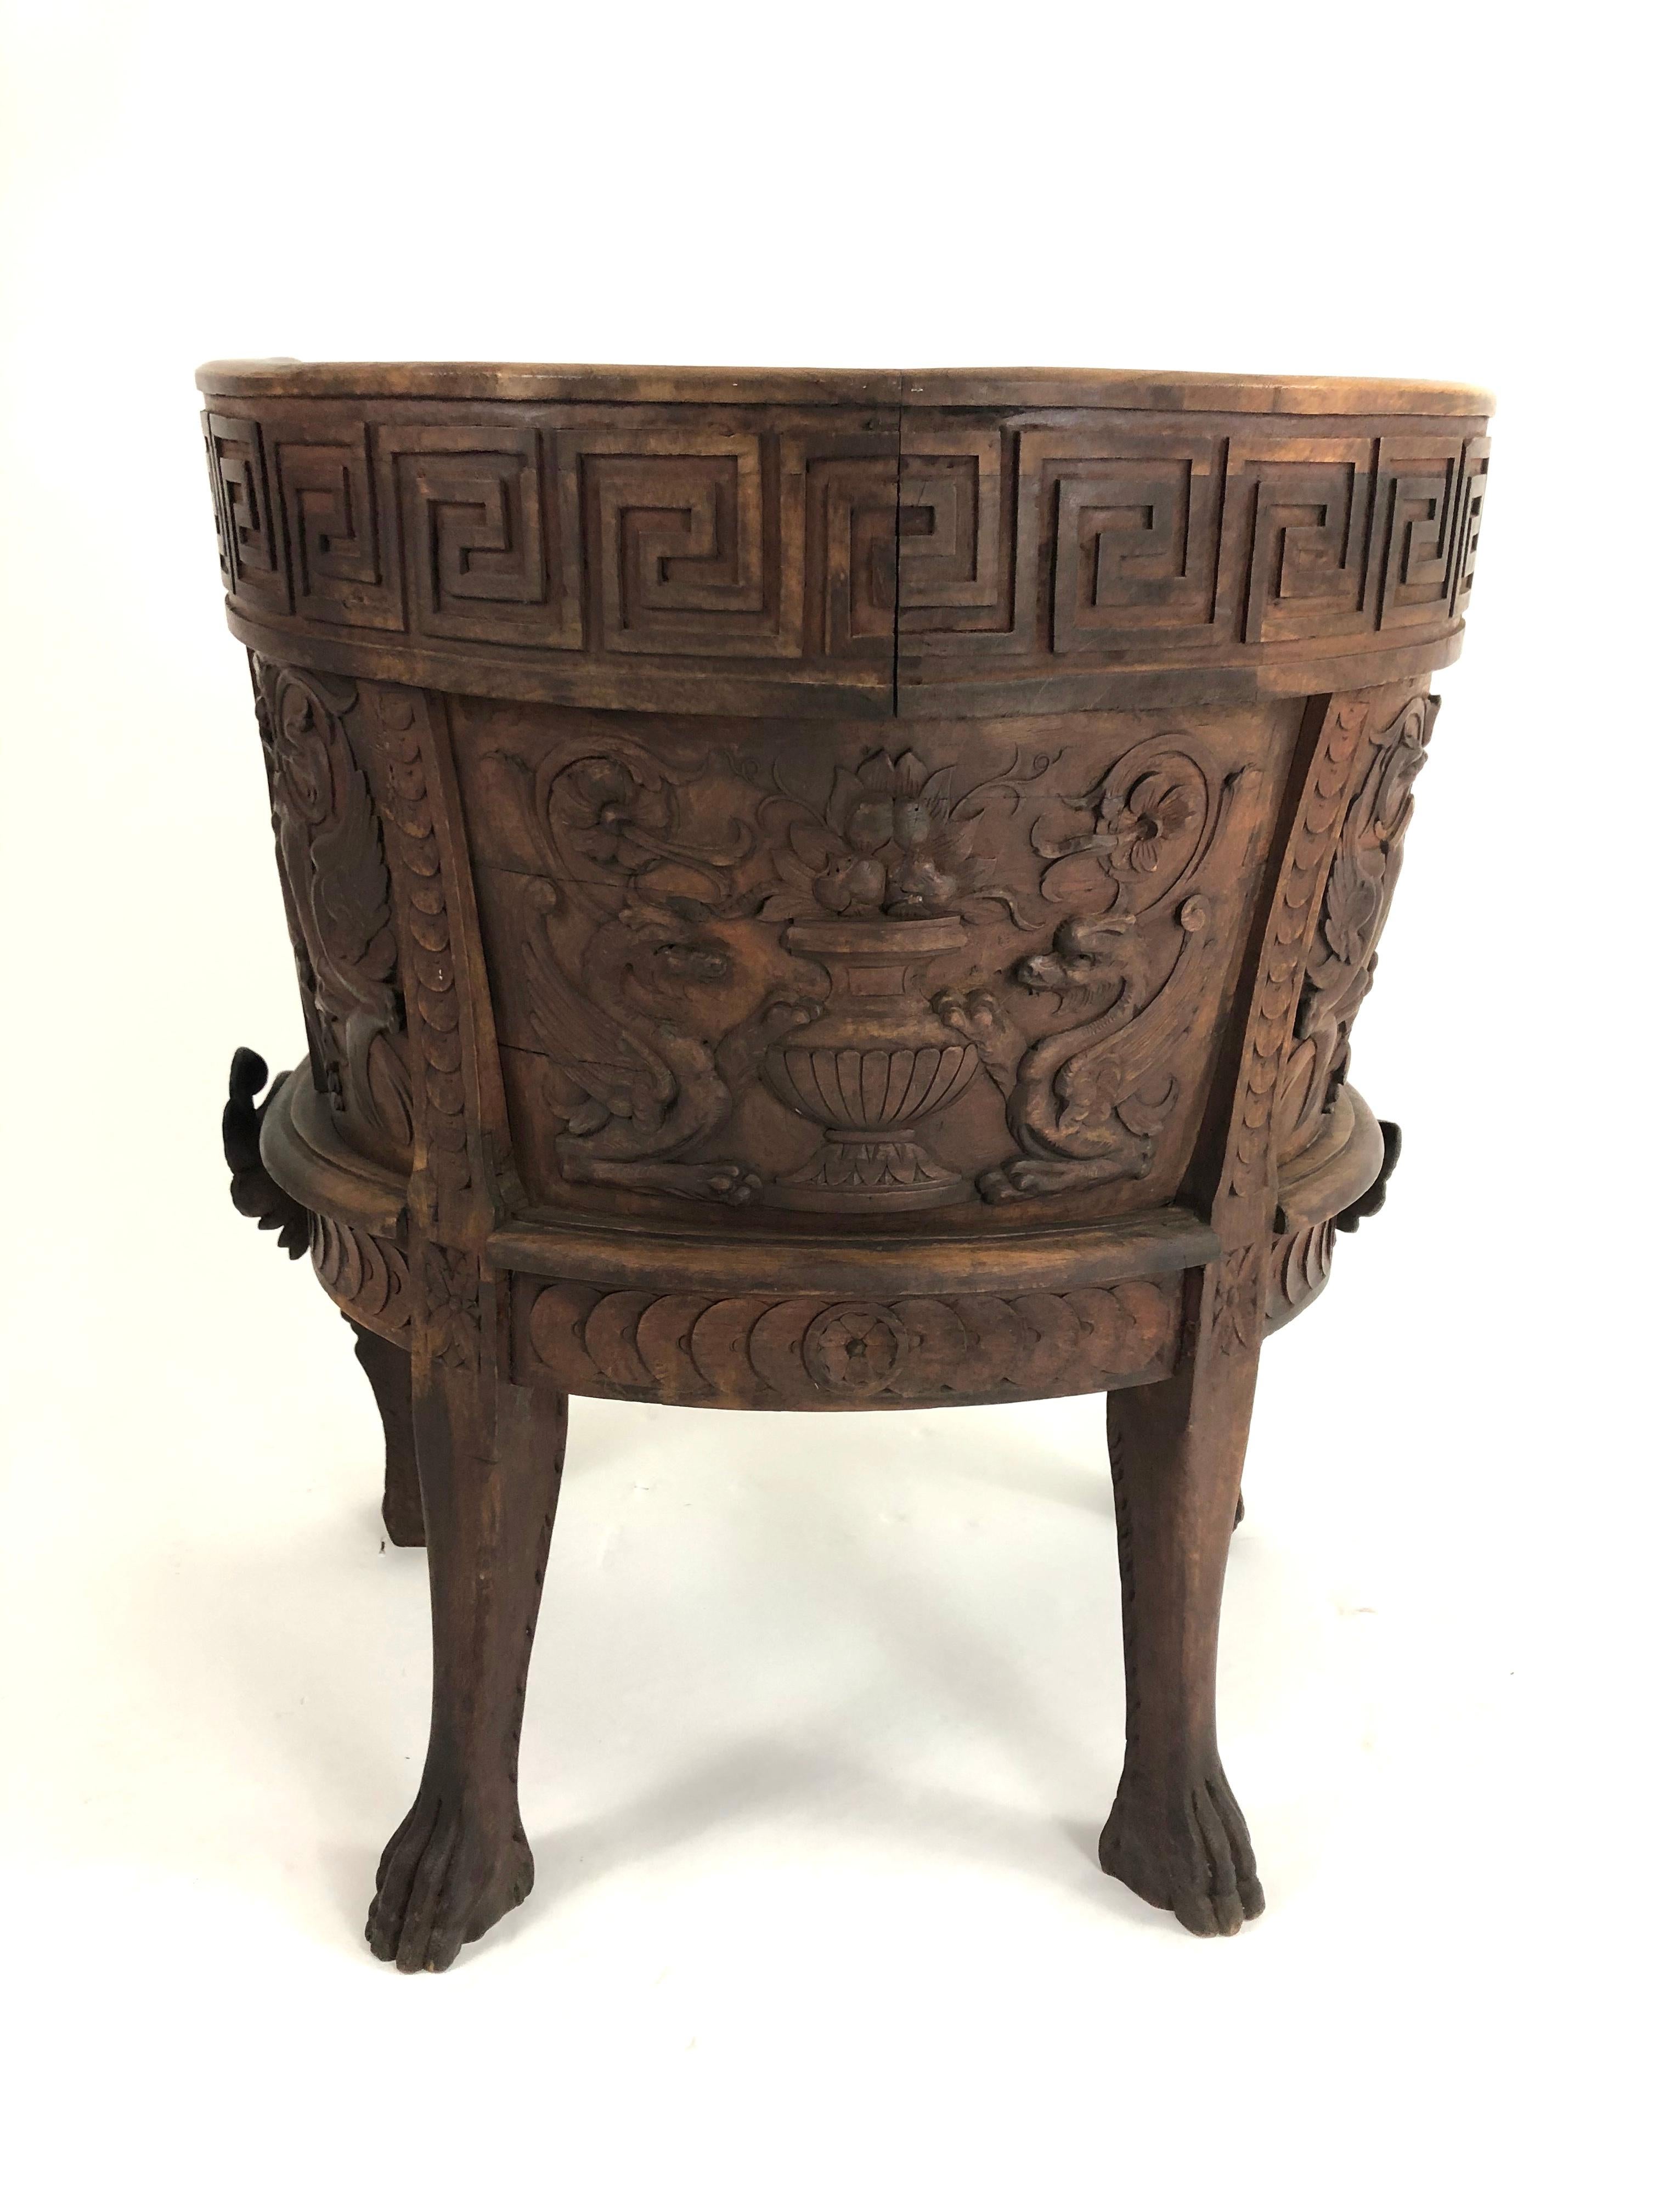 19th Century Neoclassical Carved Walnut Grand Tour Throne Armchair